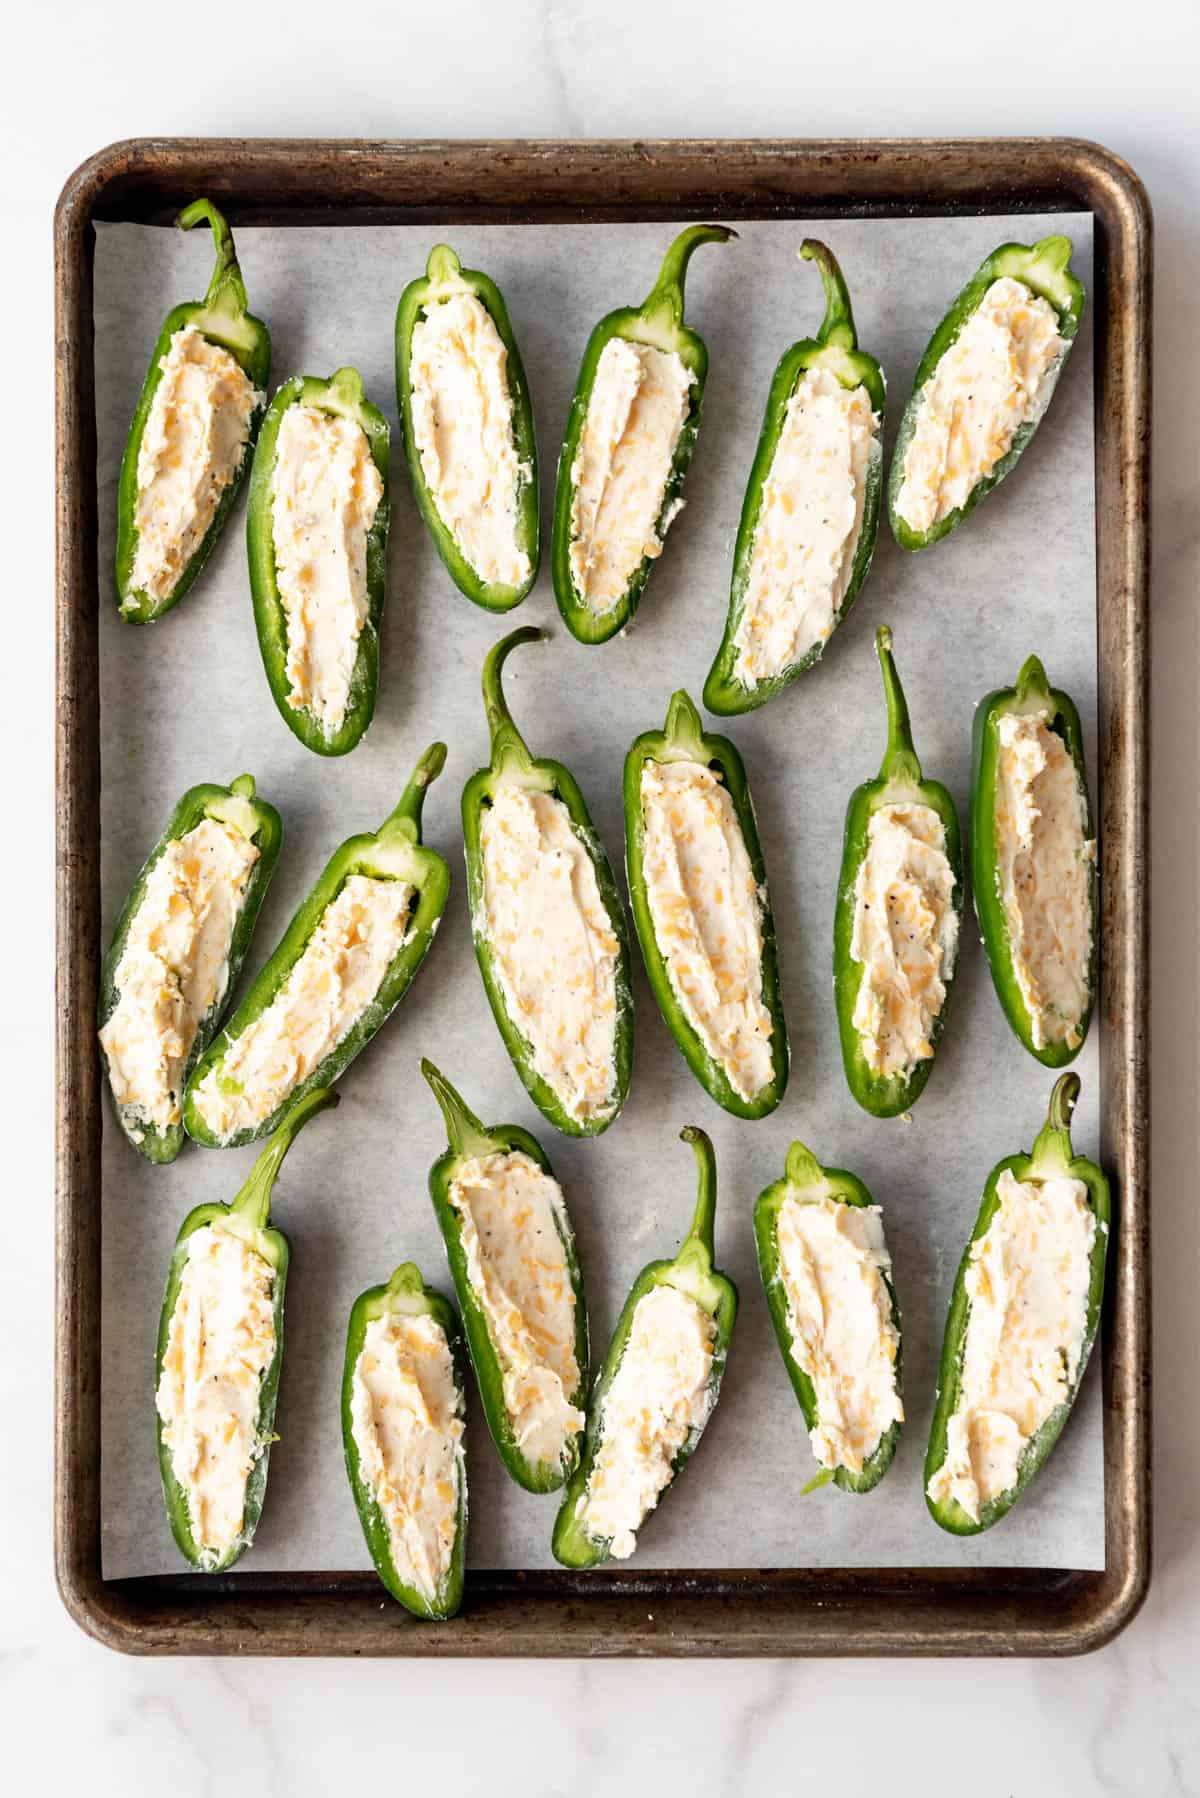 Jalapeno halves with cream cheese and cheddar cheese filling on a baking sheet.